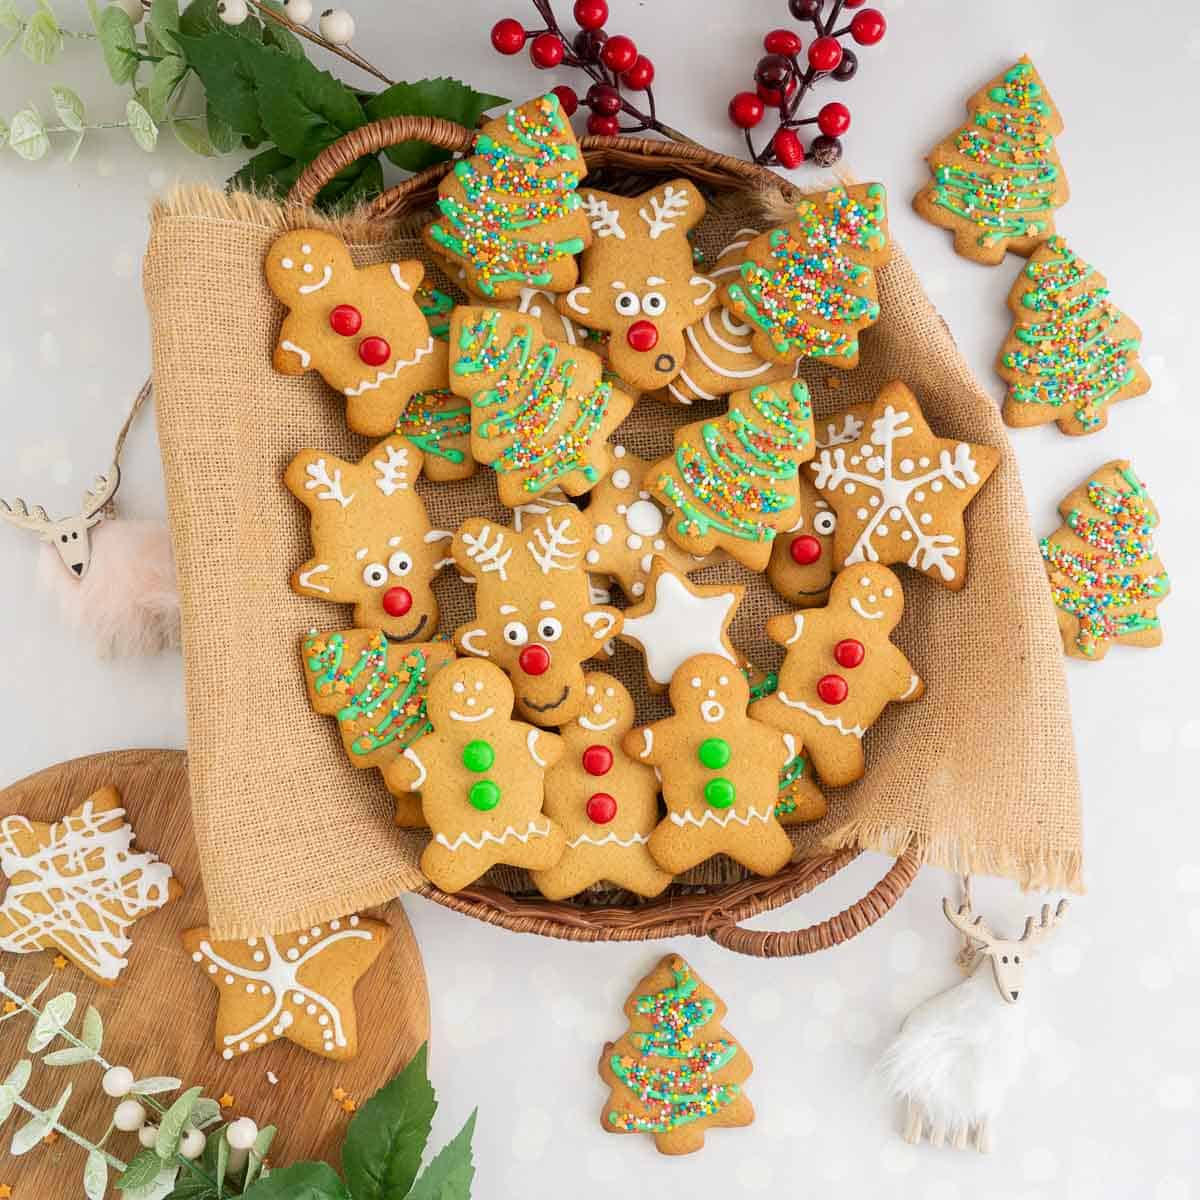 A round basket filled with a variety of decorated gingerbread cookies.